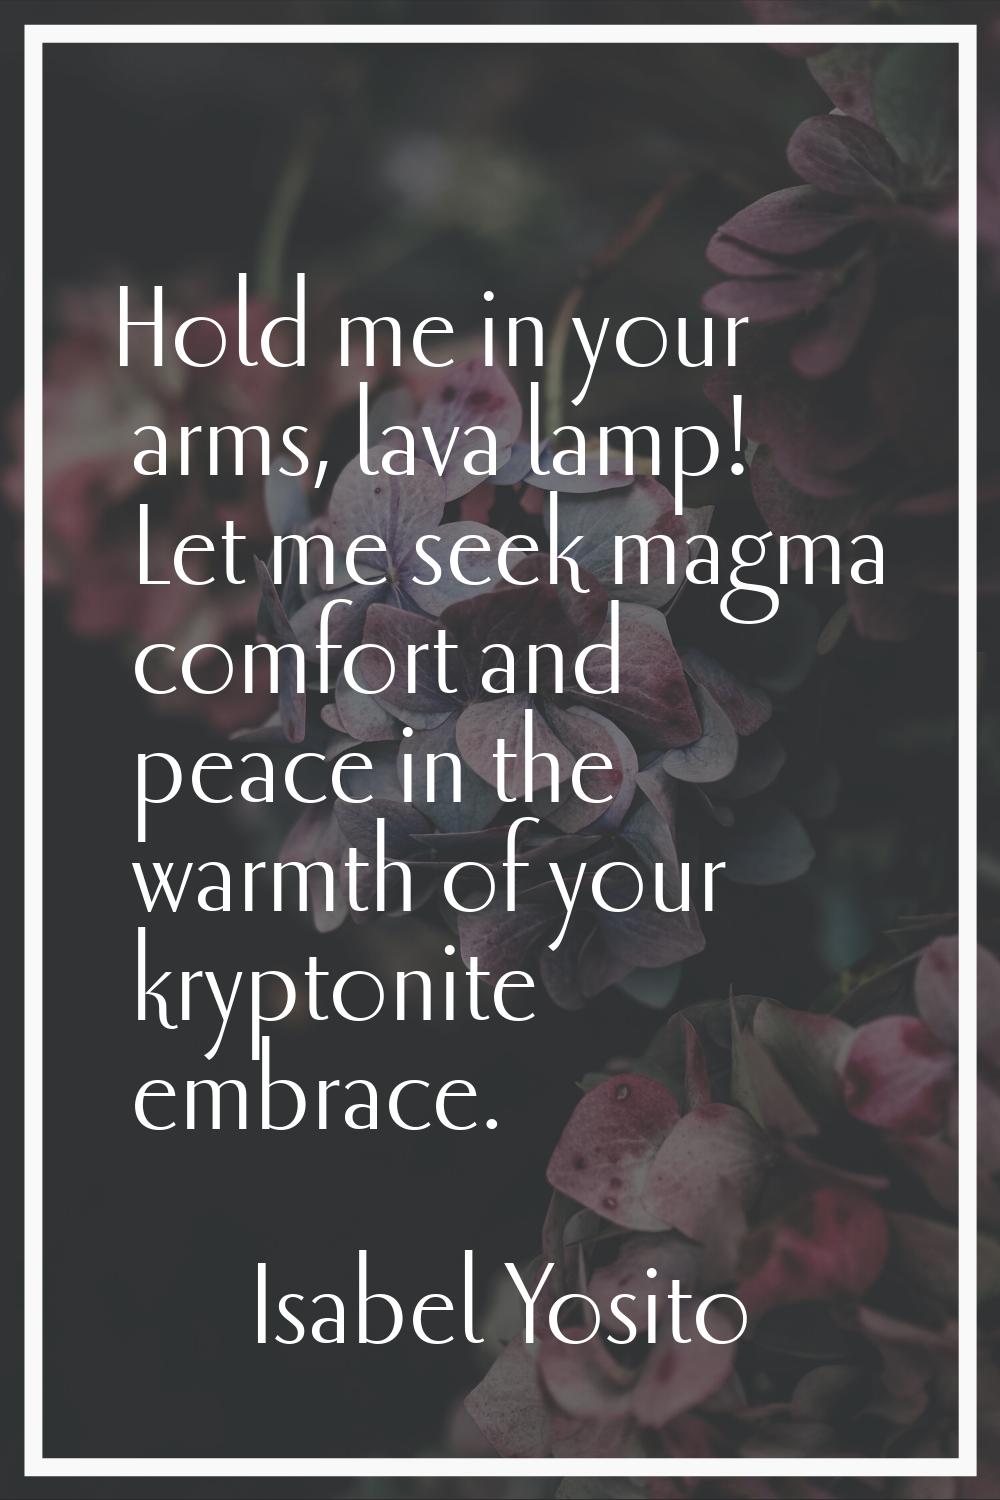 Hold me in your arms, lava lamp! Let me seek magma comfort and peace in the warmth of your kryptoni